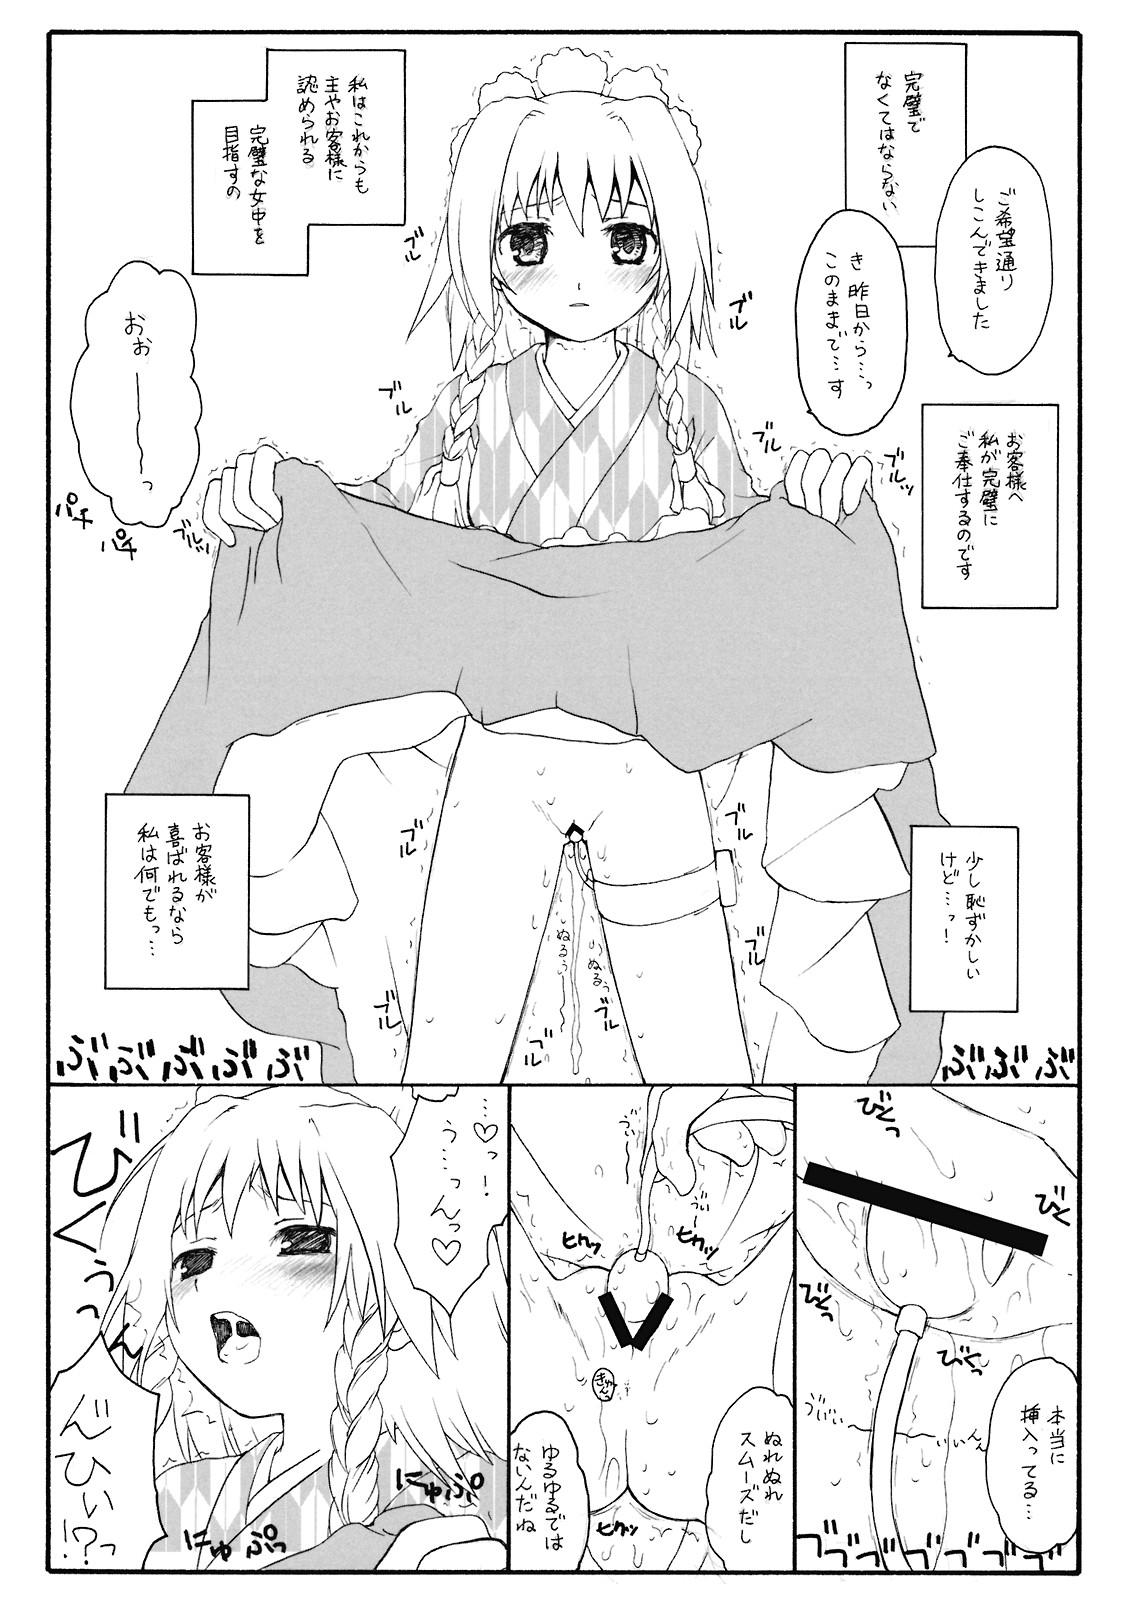 Fake Aru Omise no Ichinichi Sono 4 - Touhou project Pussy Play - Page 6